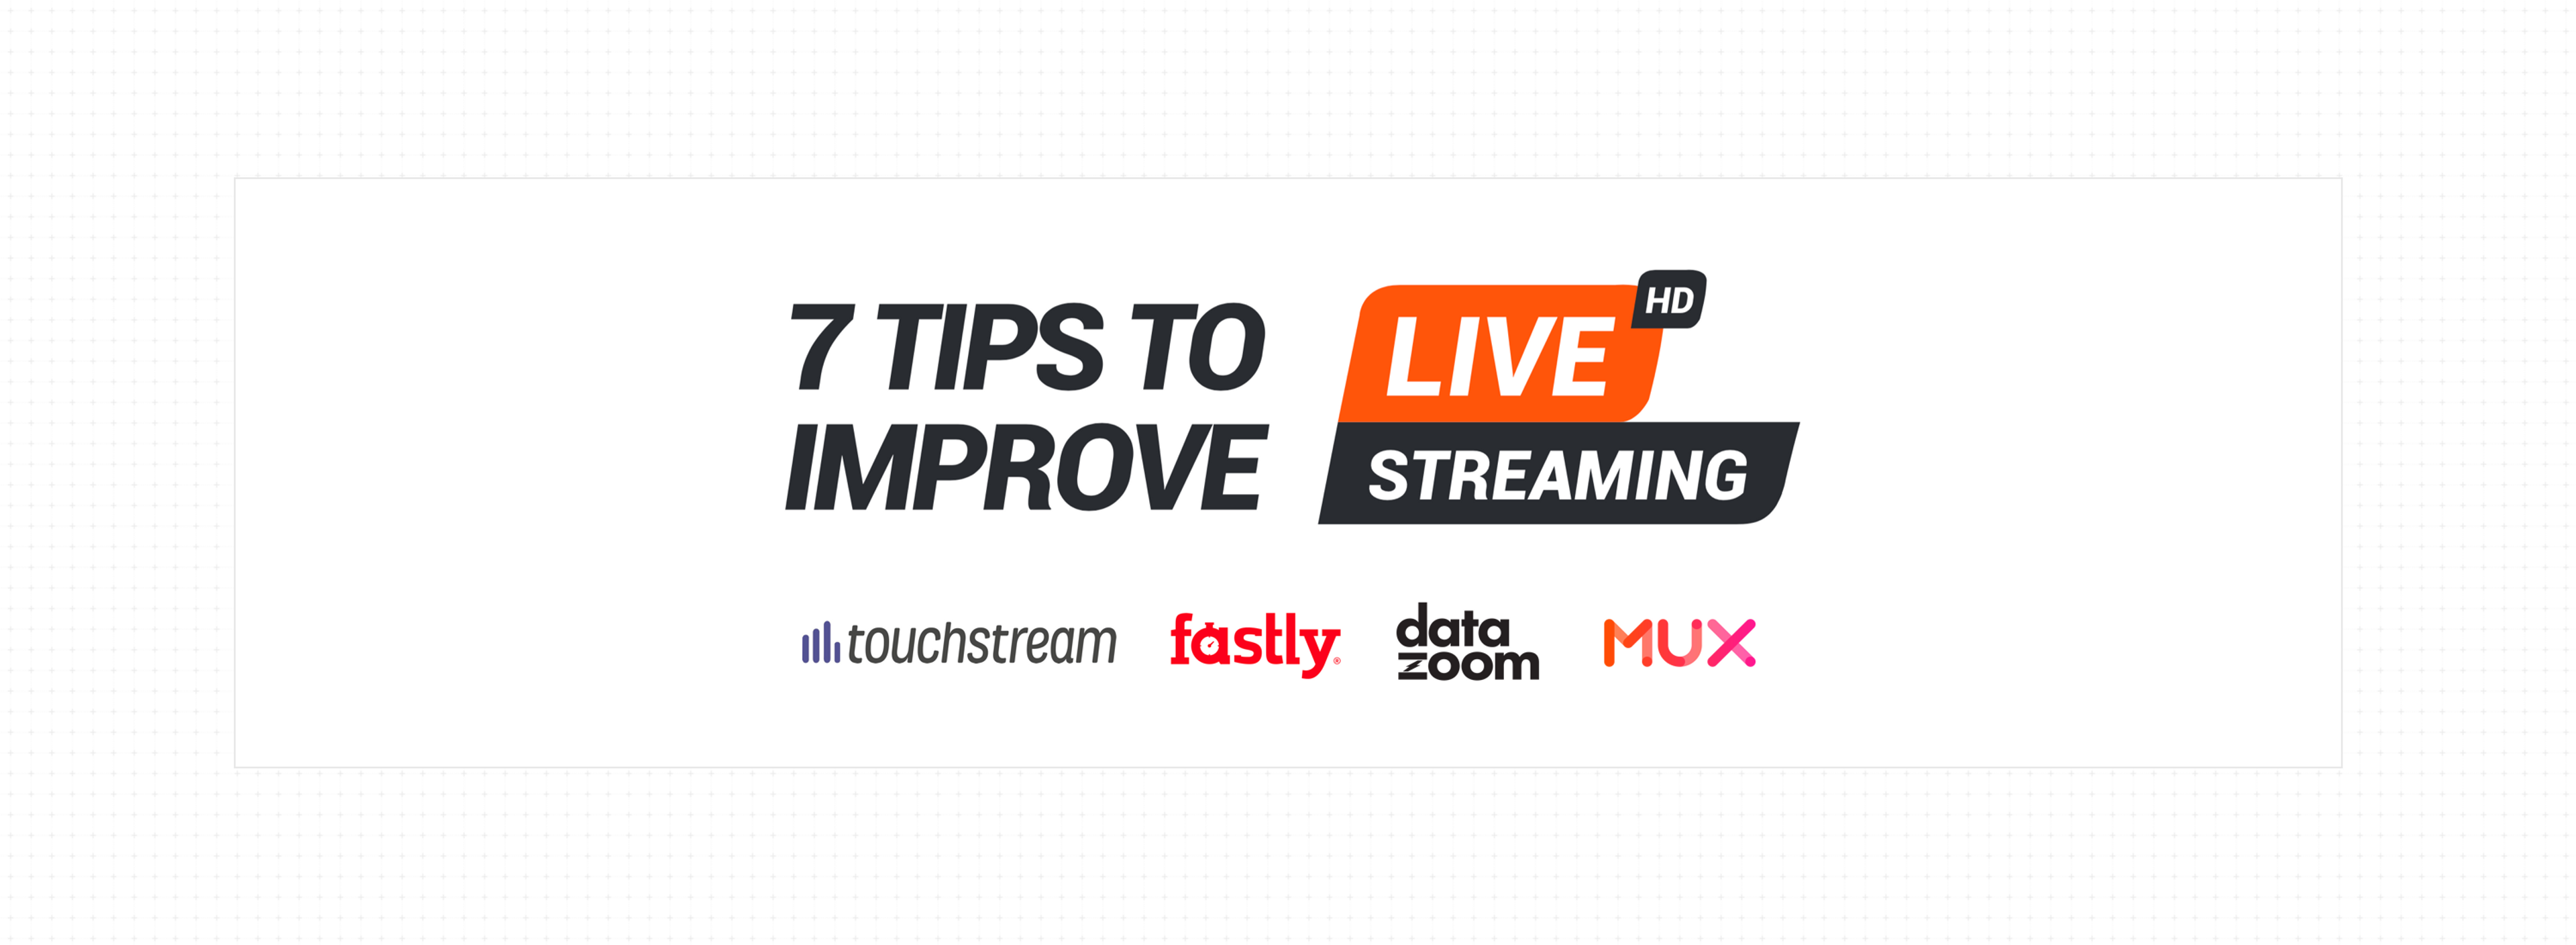 White Paper: 7 Tips to improve Live Streaming